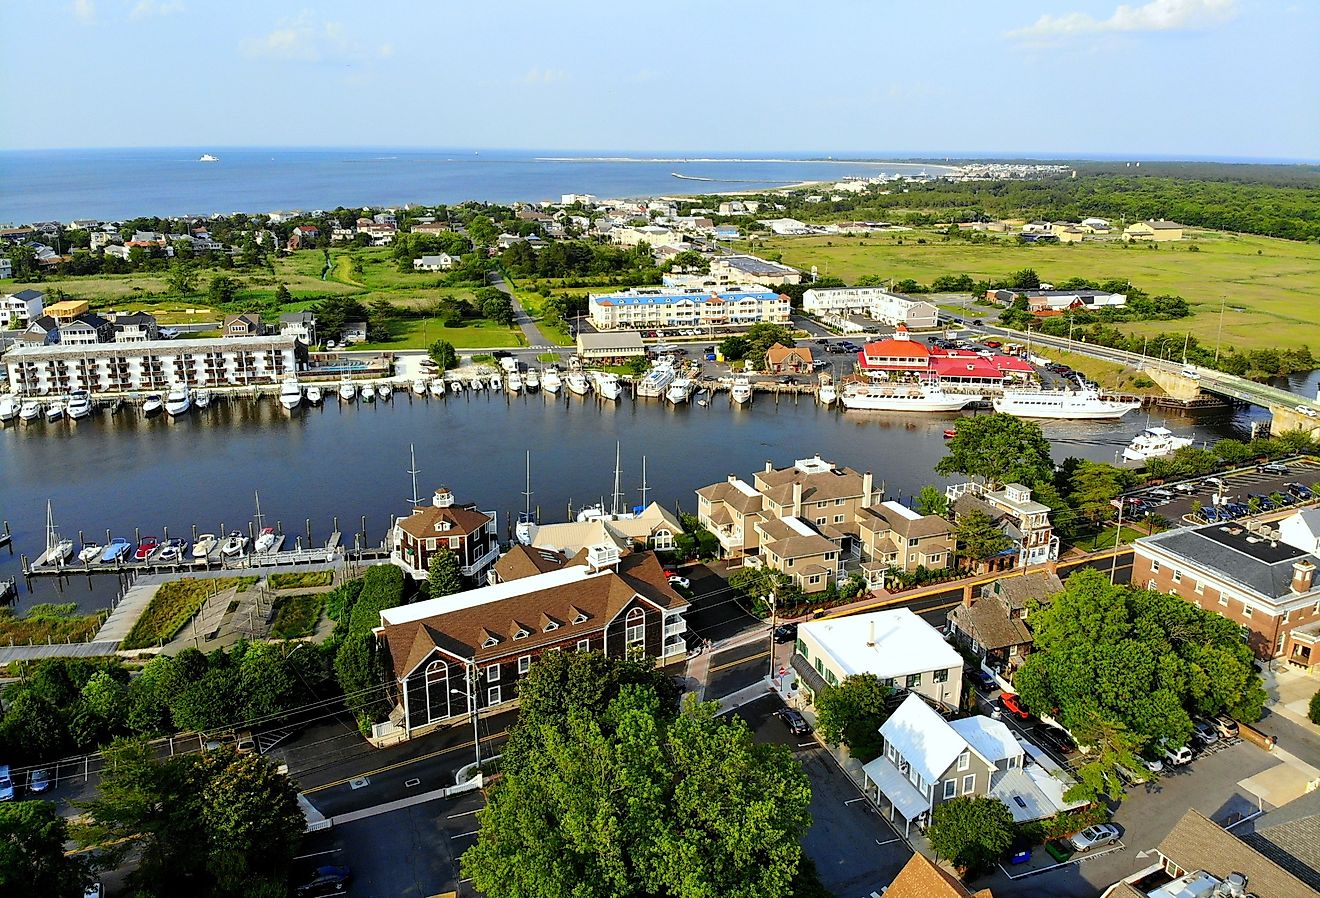 The aerial view of the beach, fishing port and waterfront residential homes along the canal in Lewes, Delaware. Image credit Khairil Azhar Junos via Shutterstock